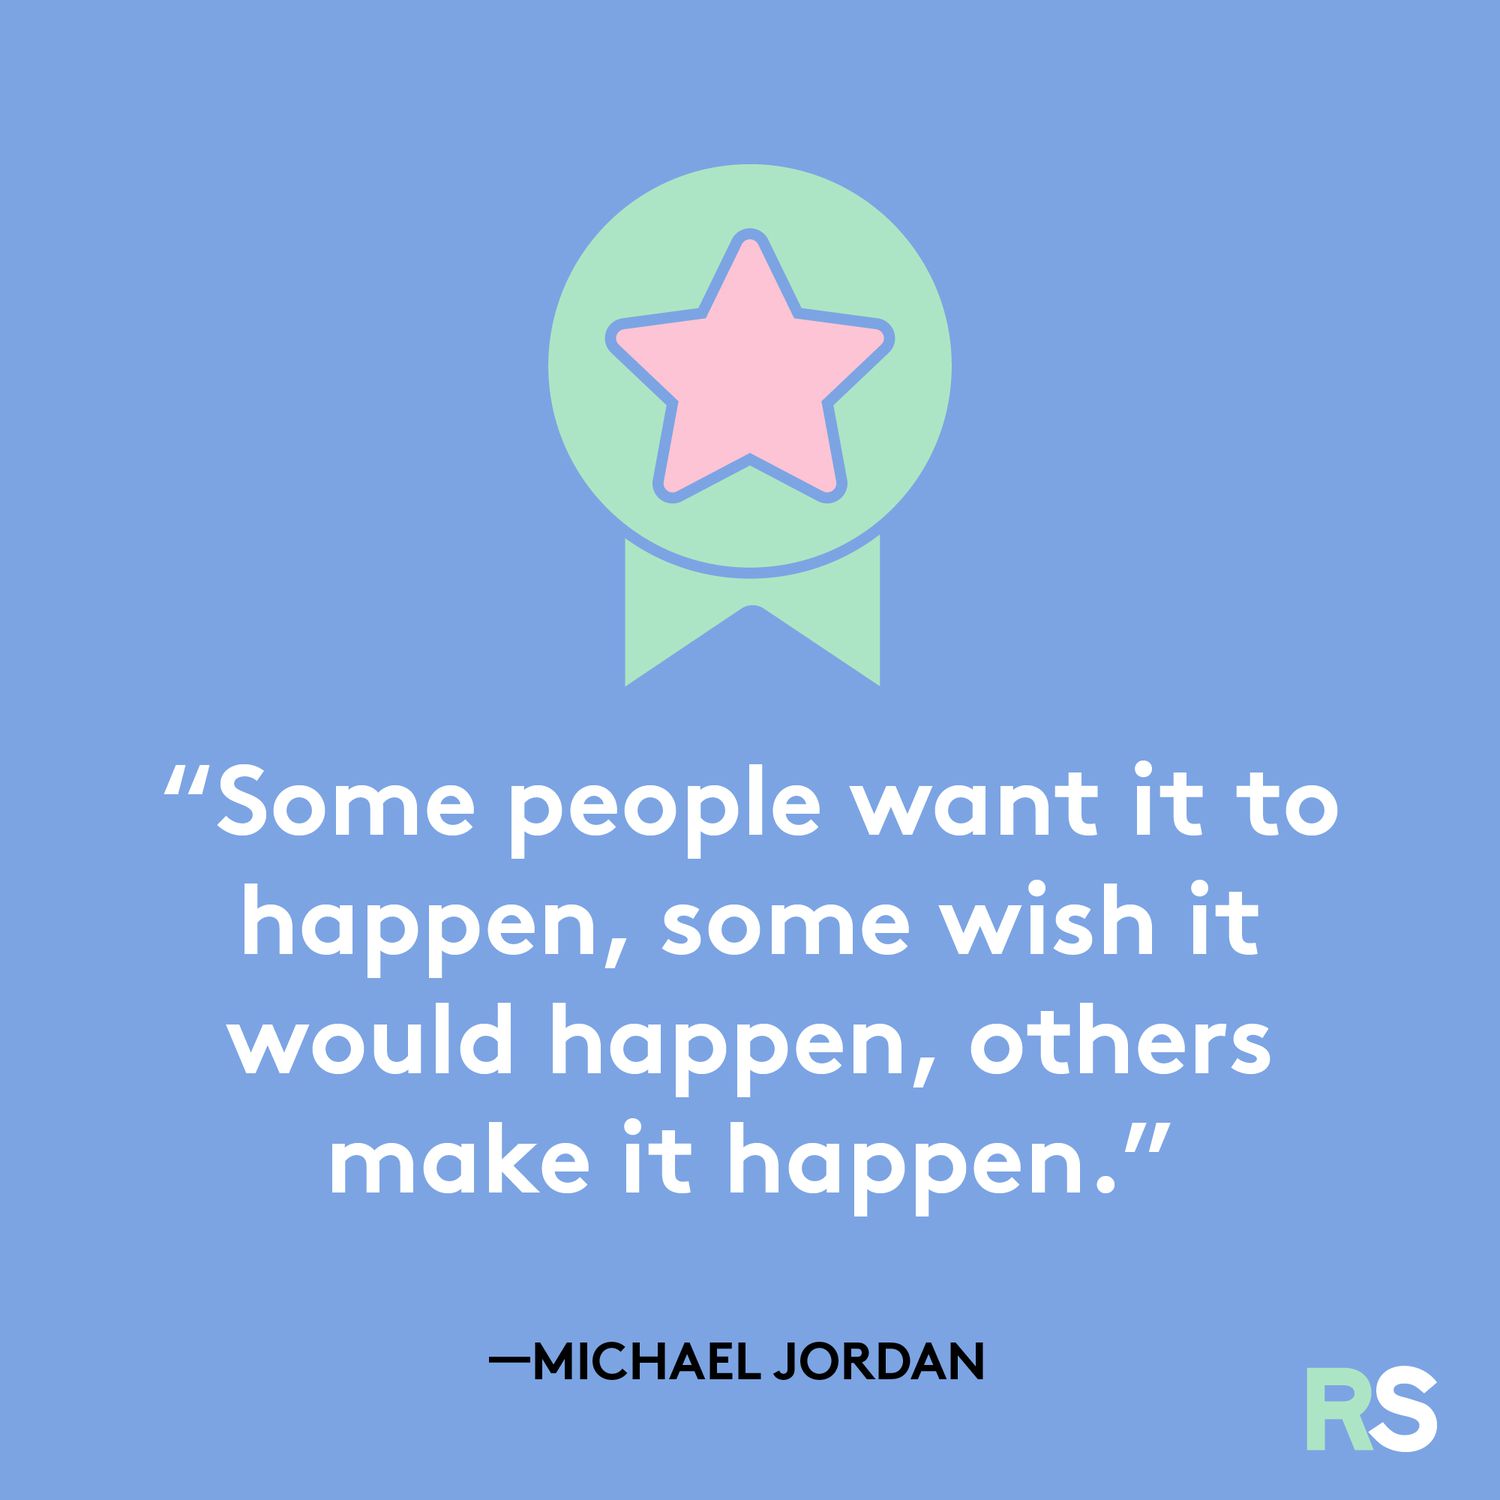 Some people want it to happen, some wish it would happen, others make it happen.